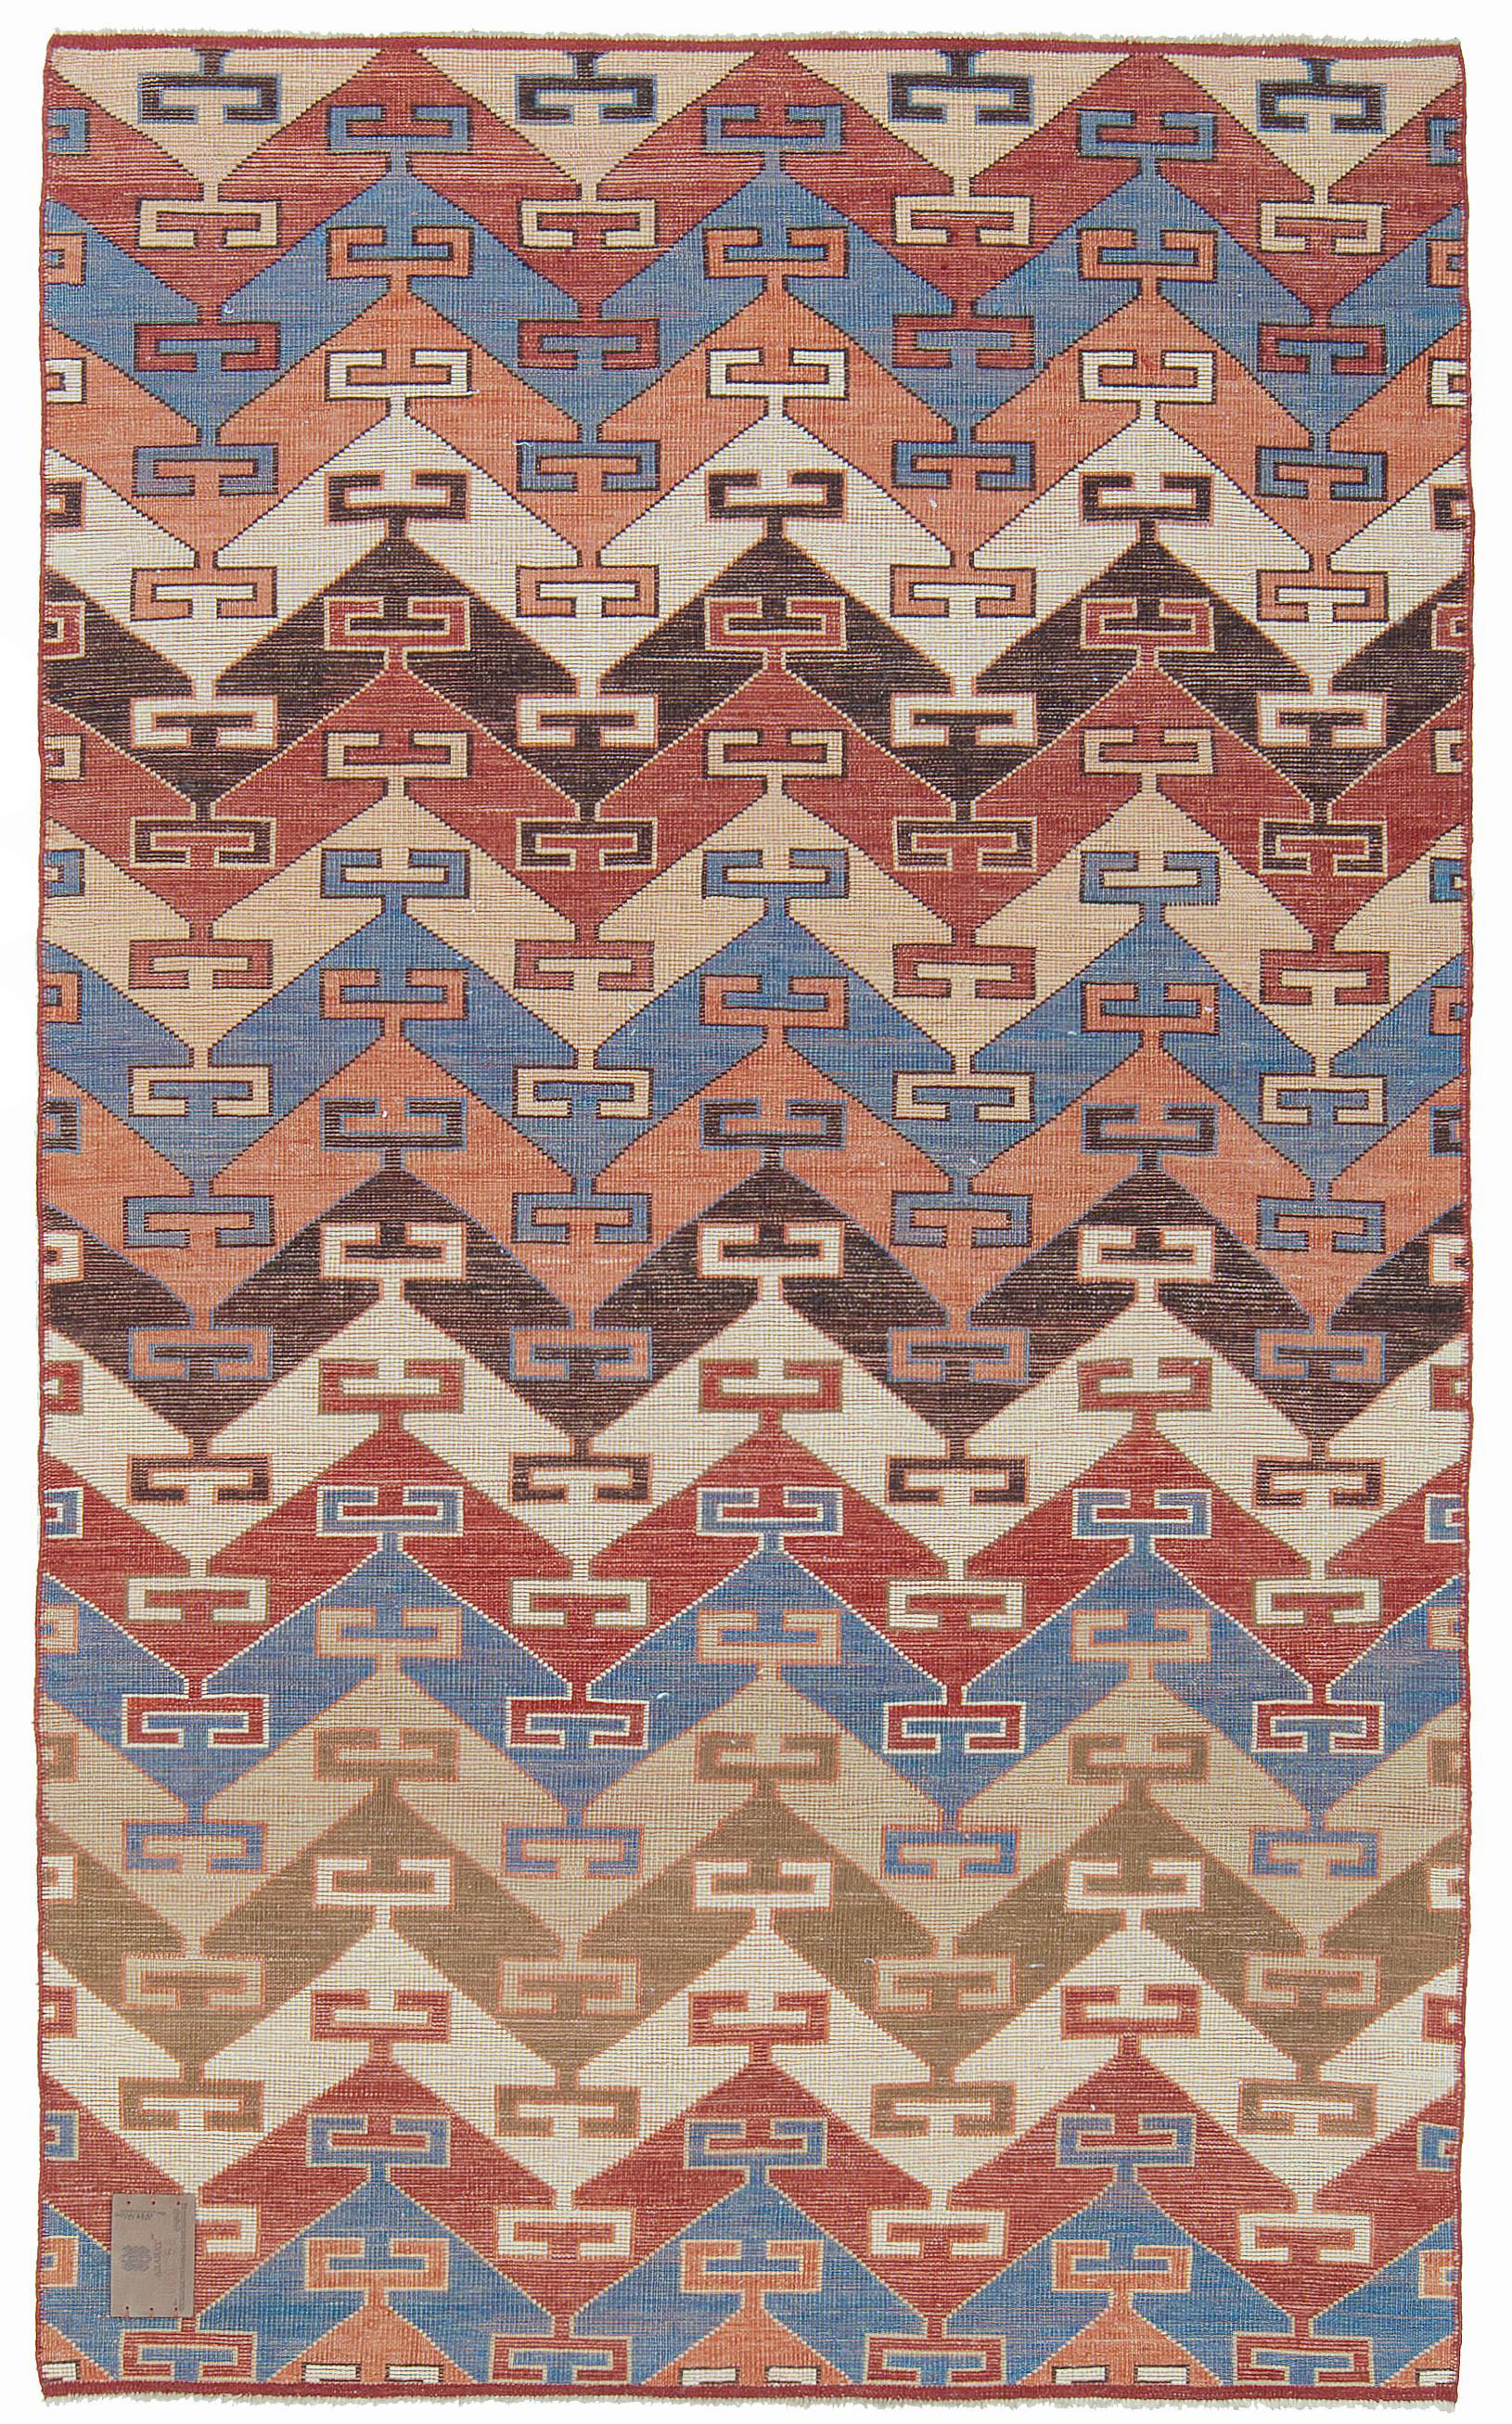 The source of the rug comes from the book Orient Star – A Carpet Collection, E. Heinrich Kirchheim, Hali Publications Ltd, 1993 nr.181. This is an unusual zig-zag line design 17th-century rug from the Konya region, Central Anatolia area, Turkey.